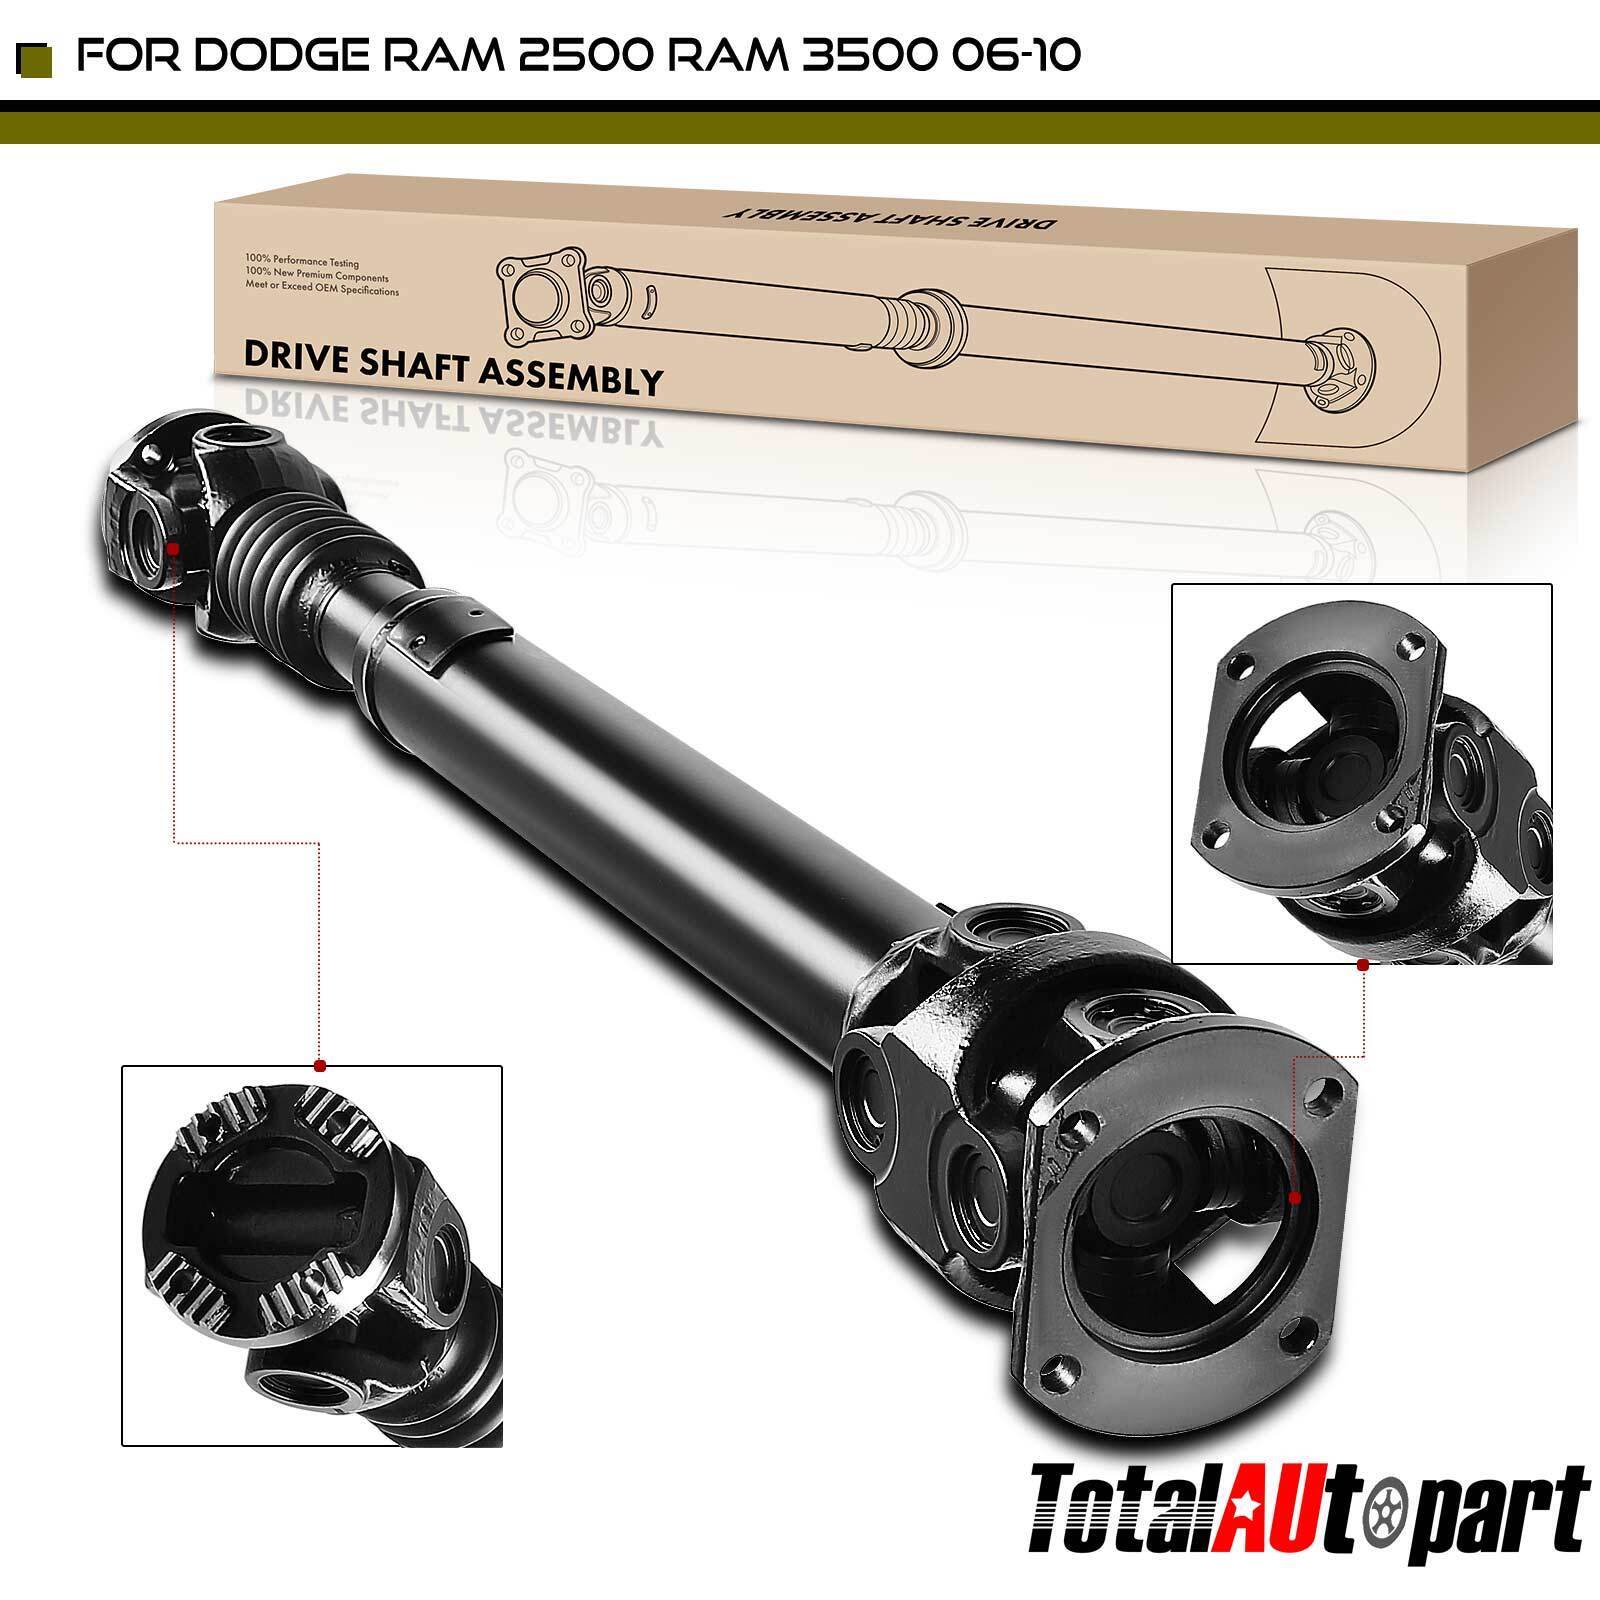 New Front Side Drive Shaft Assembly for Dodge Ram 2500 3500 4WD Automatic Trans